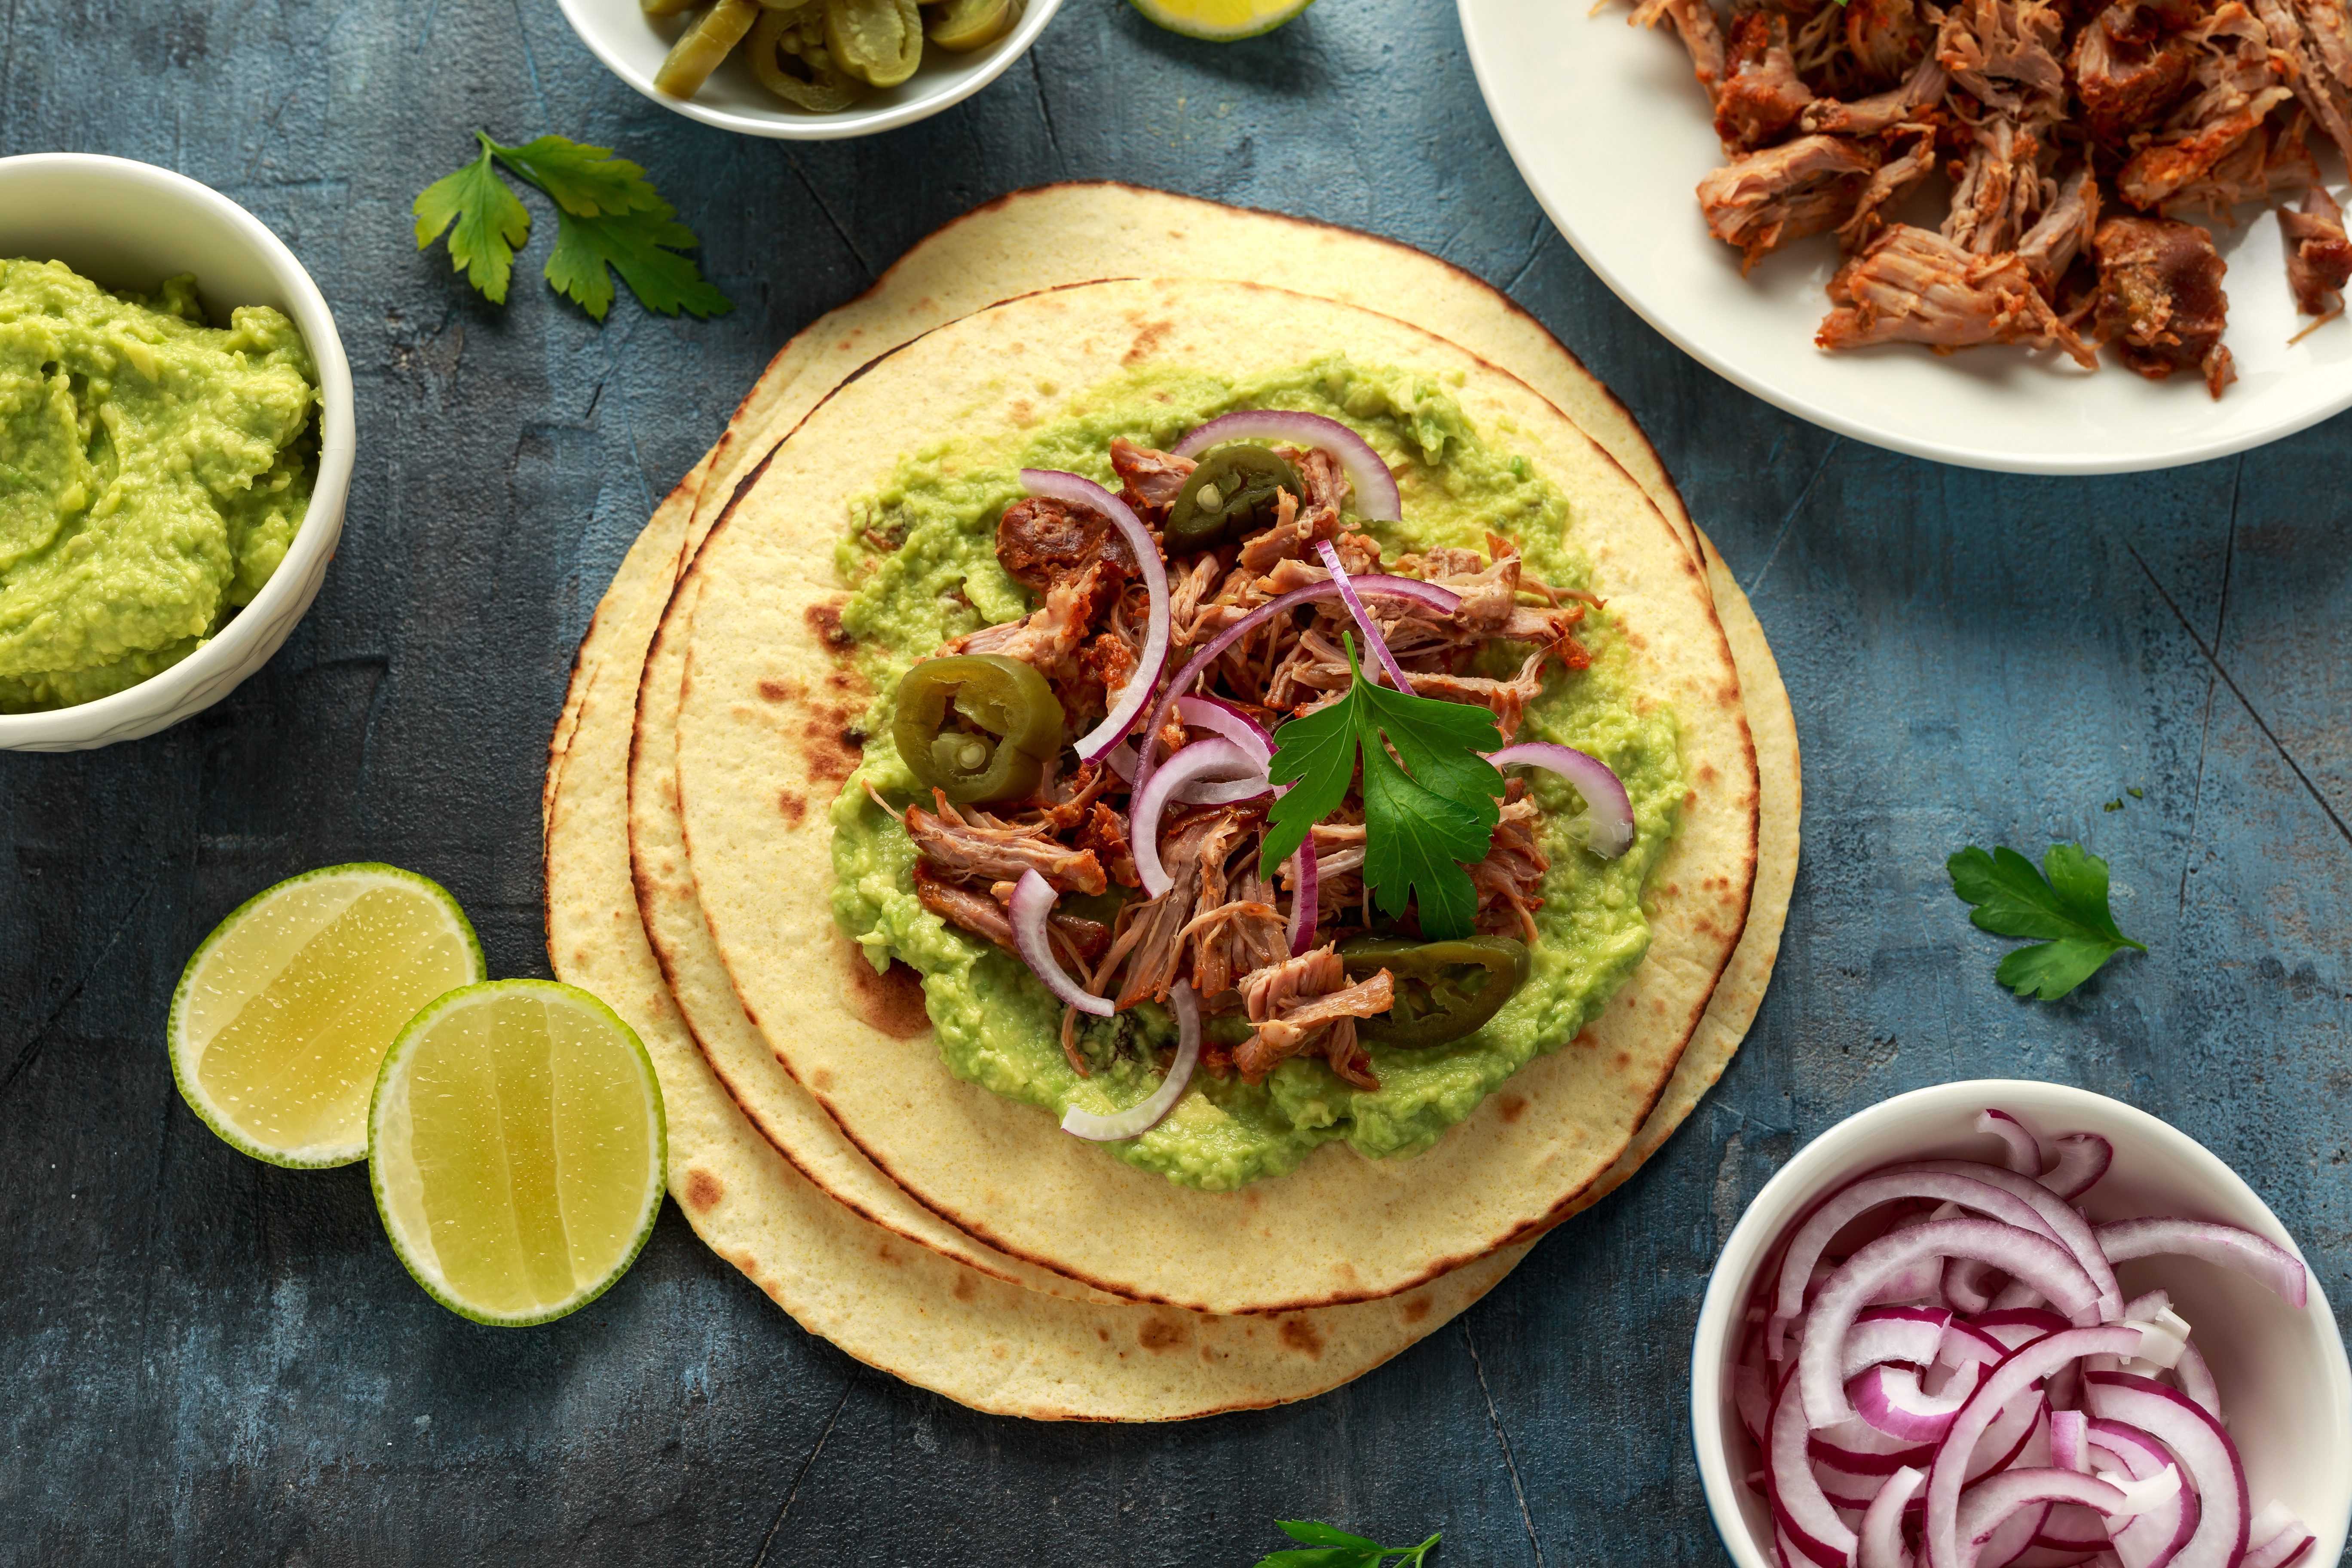 Mexican Corn tortilla with shredded Pork, avocado, red onion and jalapeno